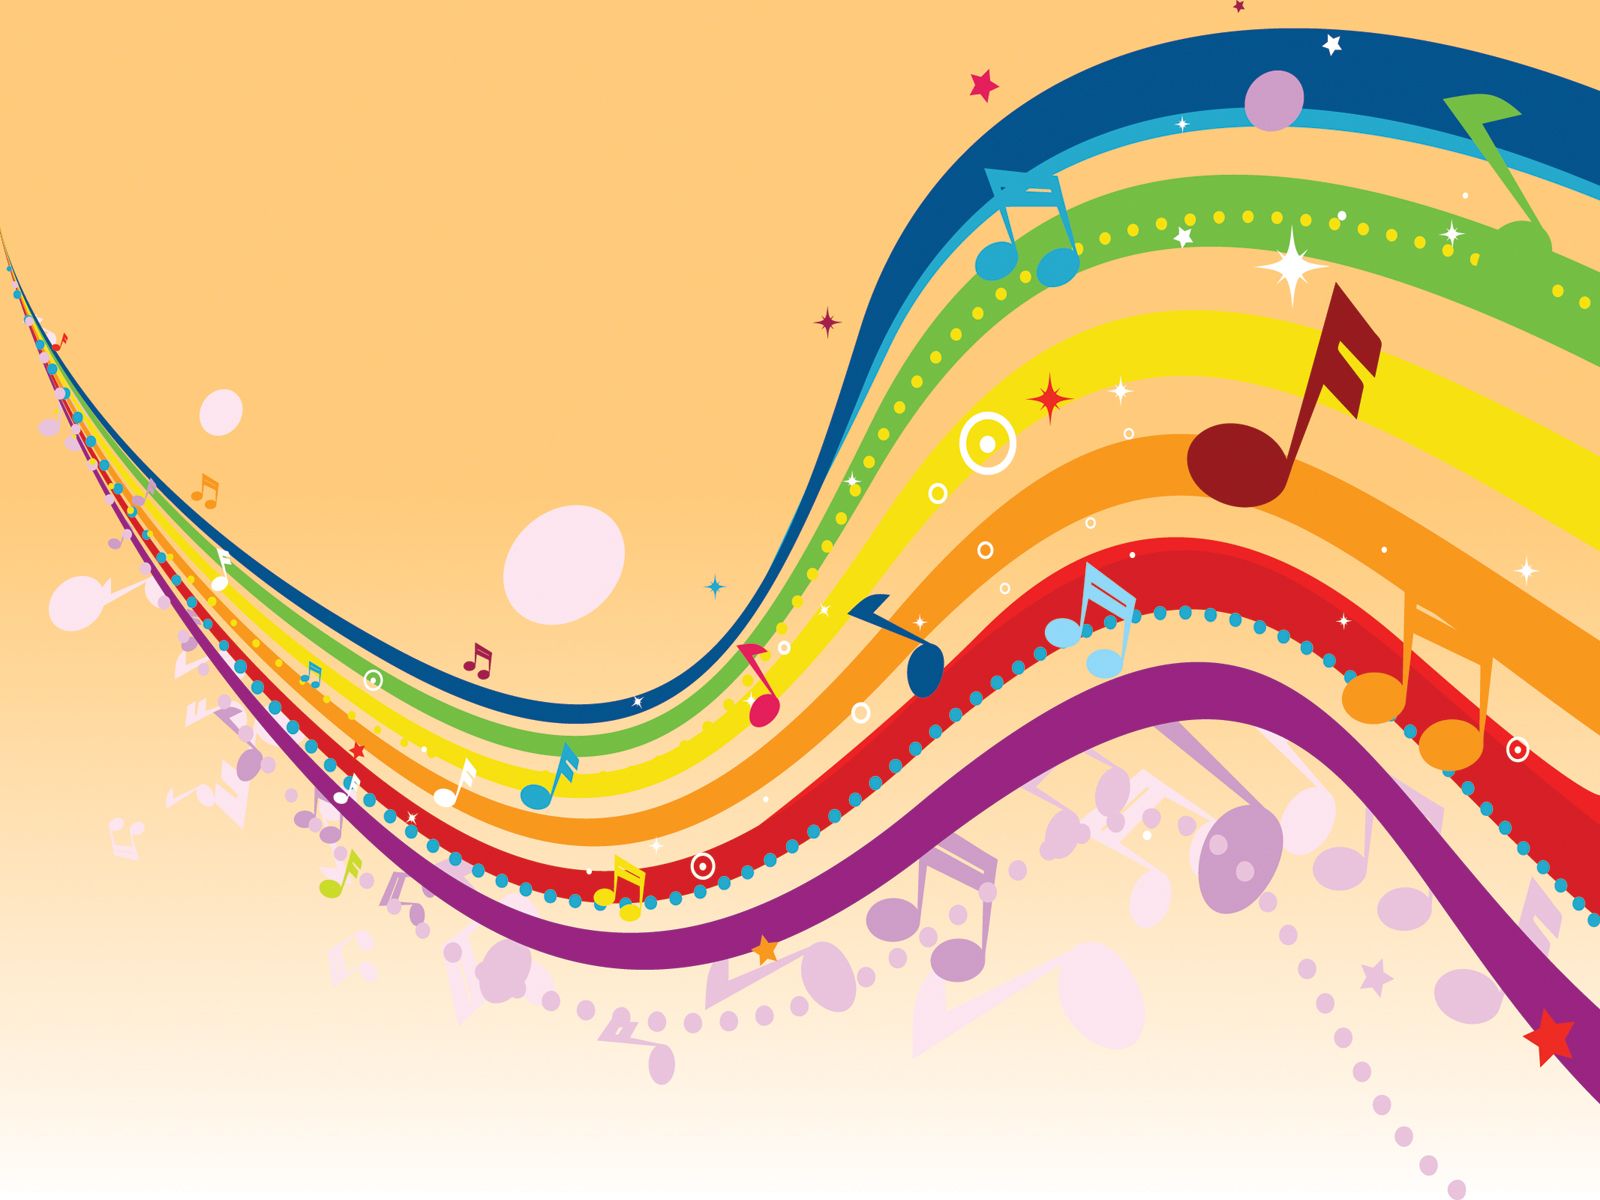 Music Backgrounds - of 2 - PPT Backgrounds